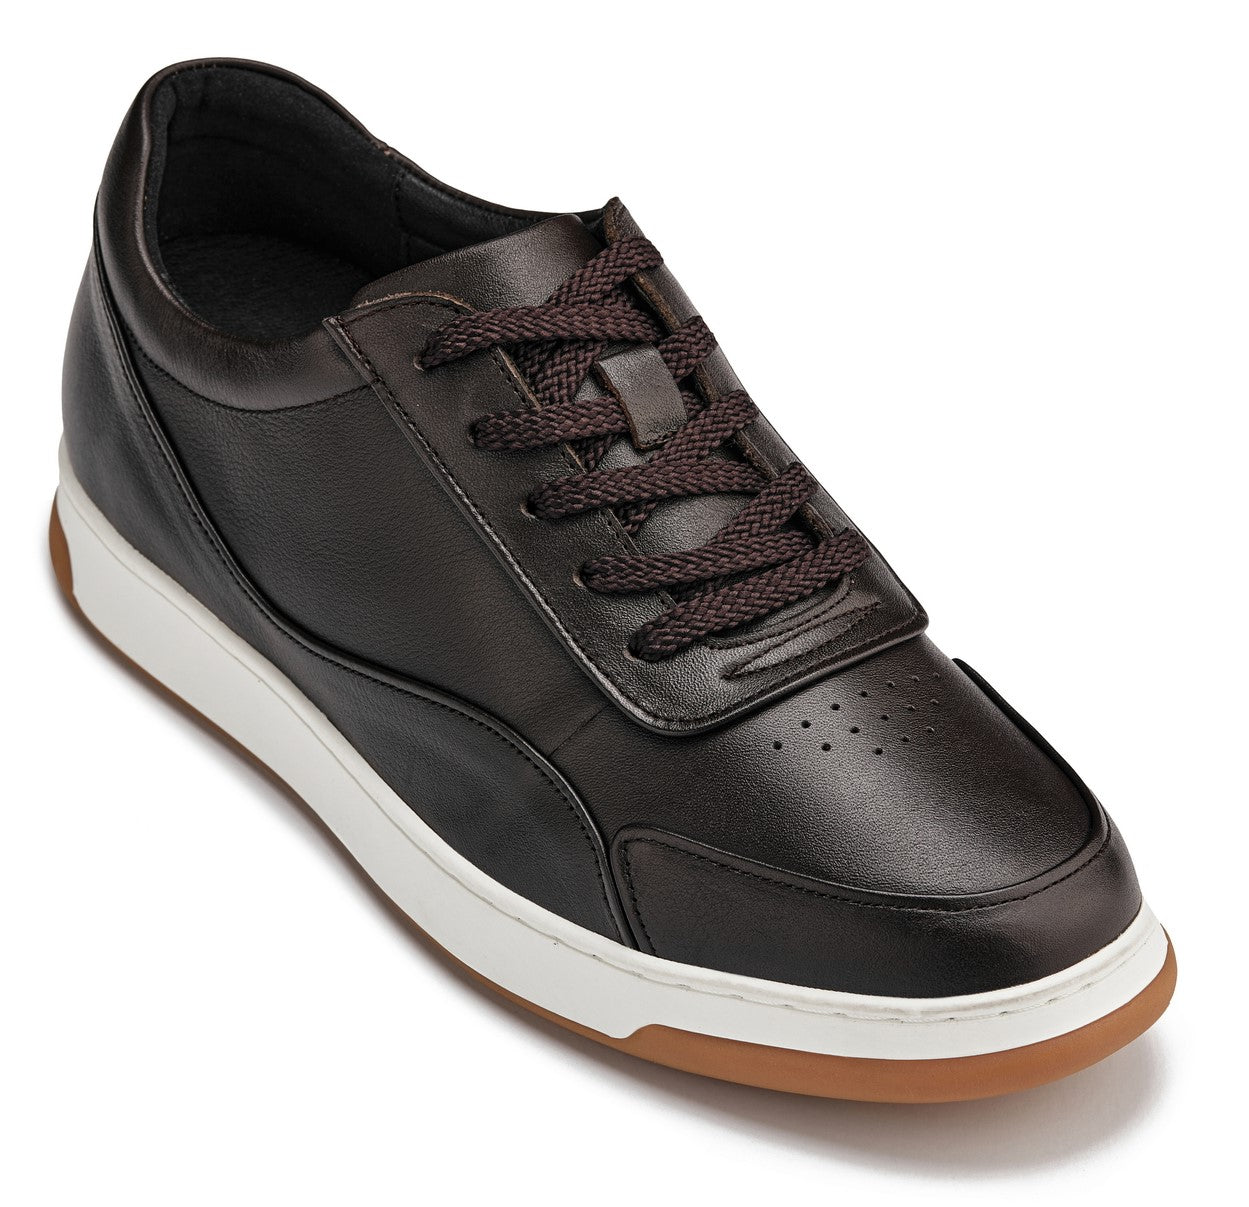 CALTO - Y7887 - 2.6 Inches Taller (Deep Espresso/White & Gum Sole) - Elevated Leather Sneakers